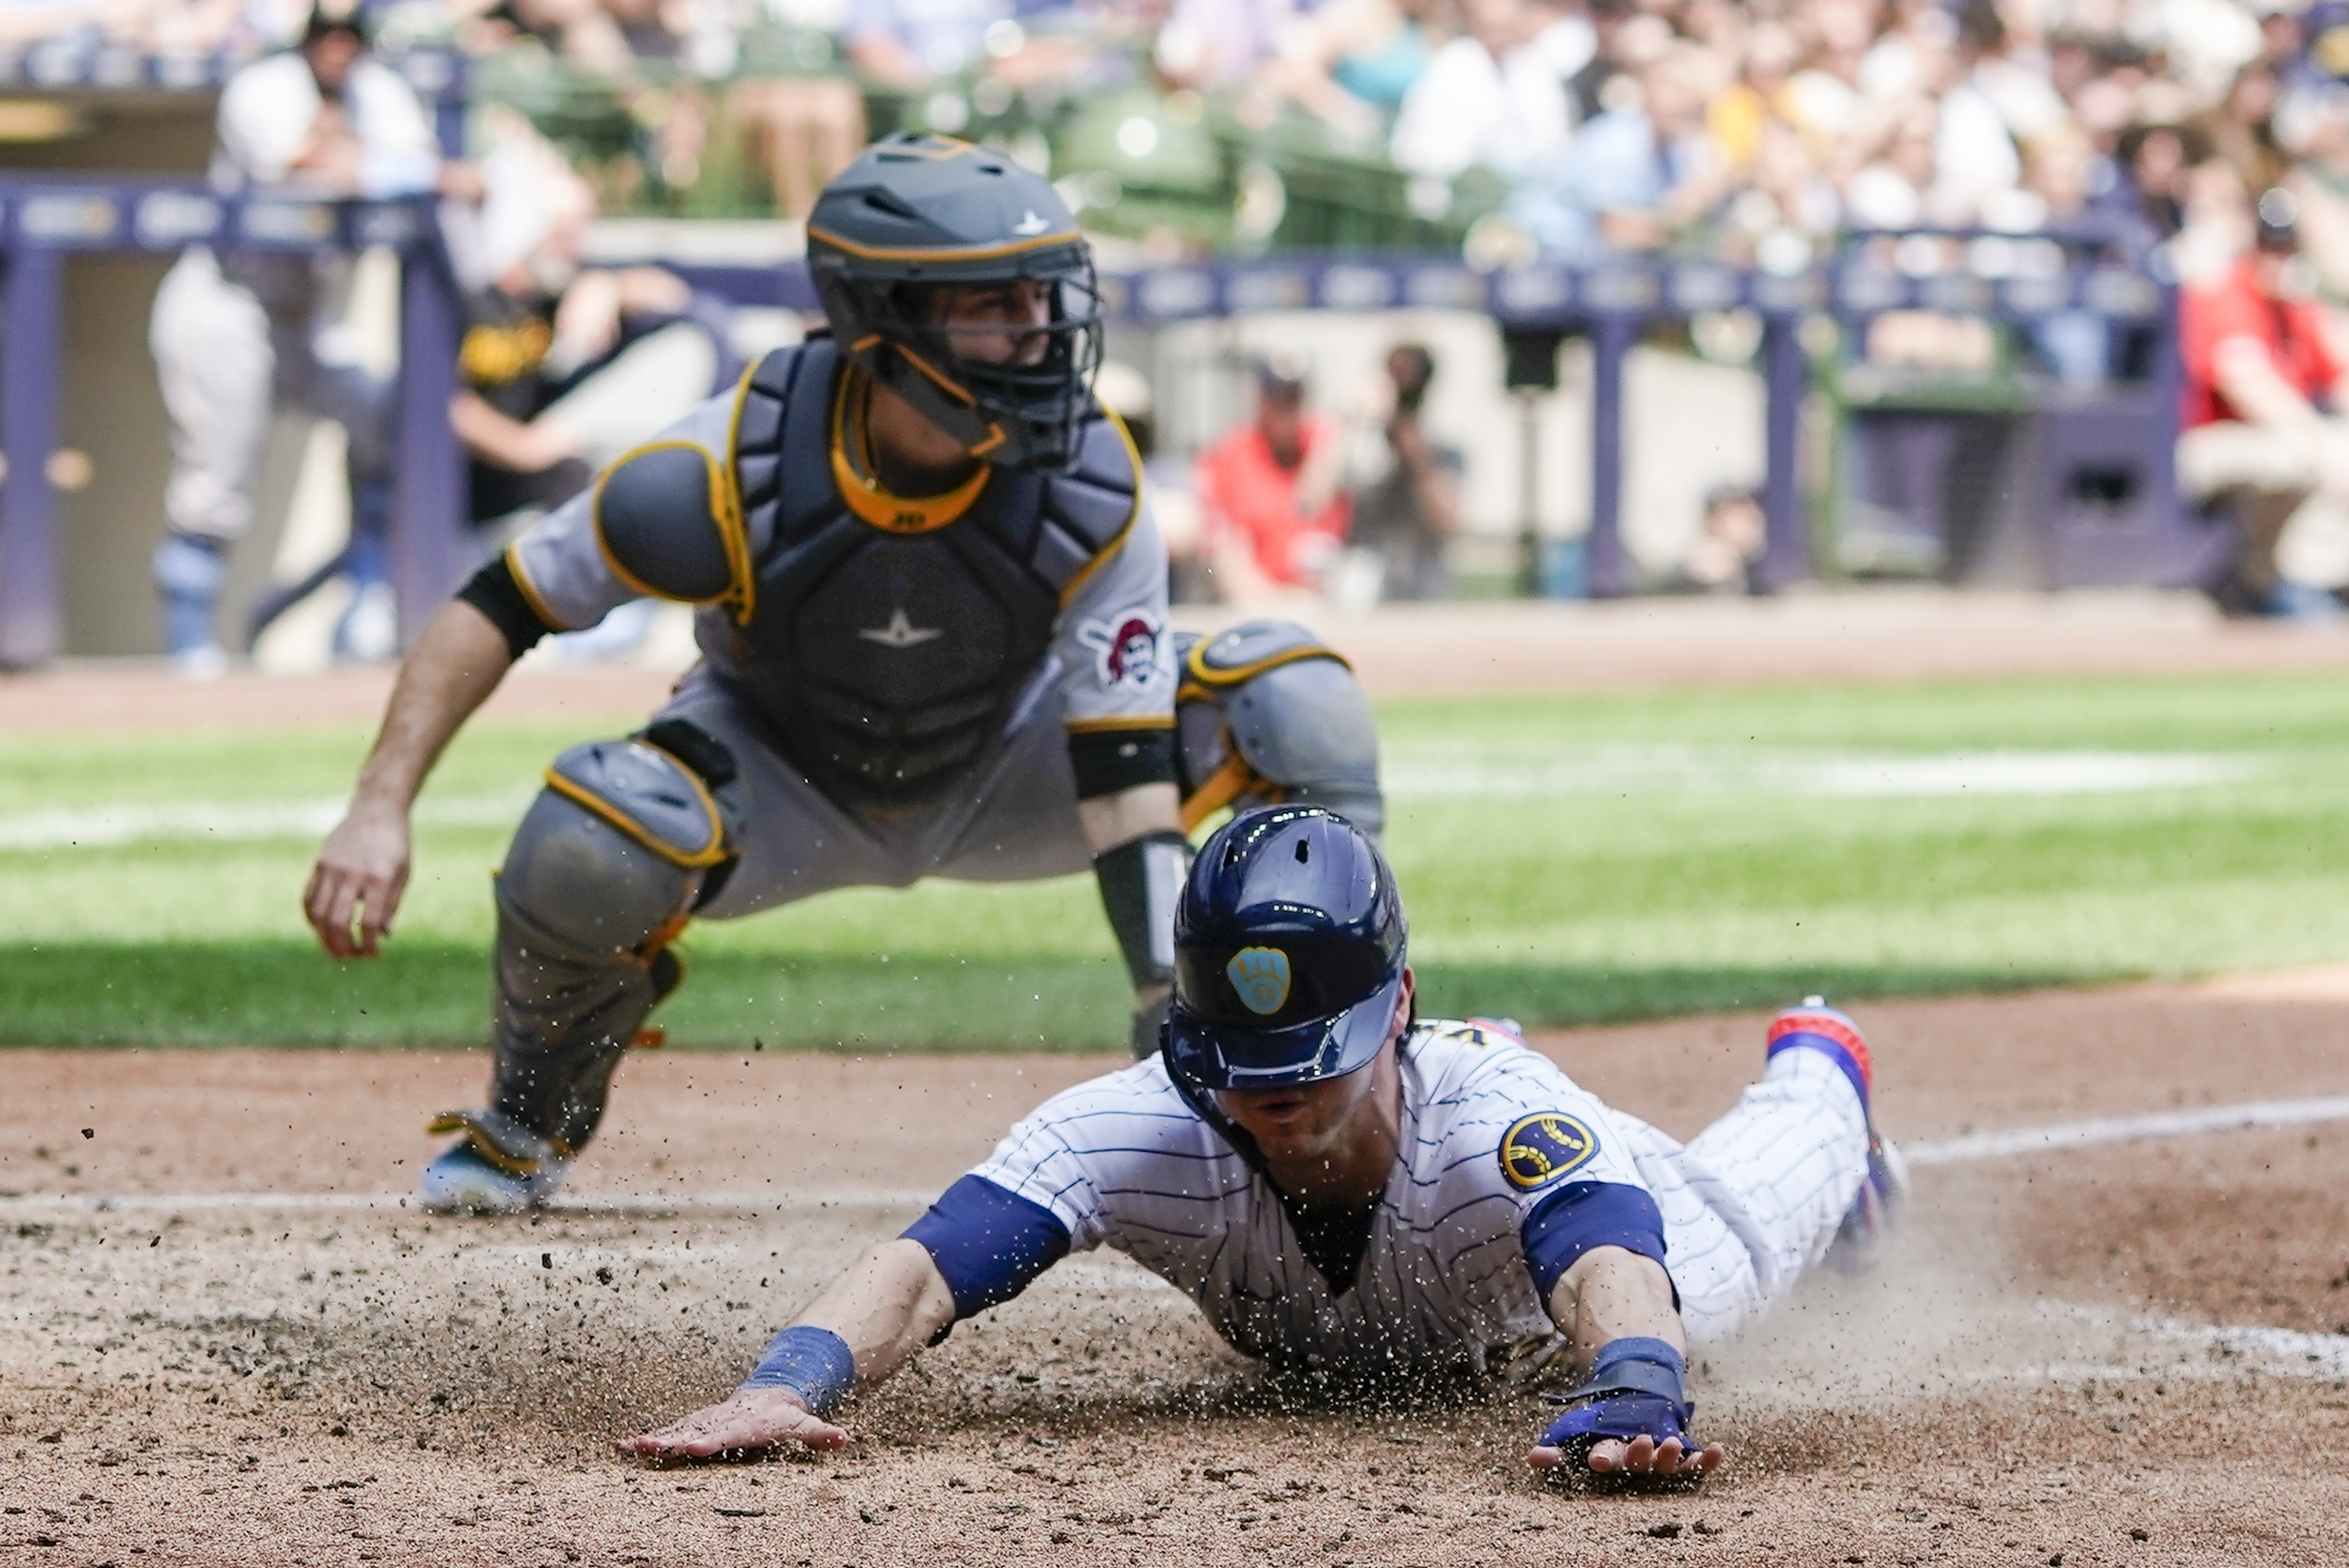 Brewers erupt for 4 runs in 8th, hand Pirates 6th straight loss 5